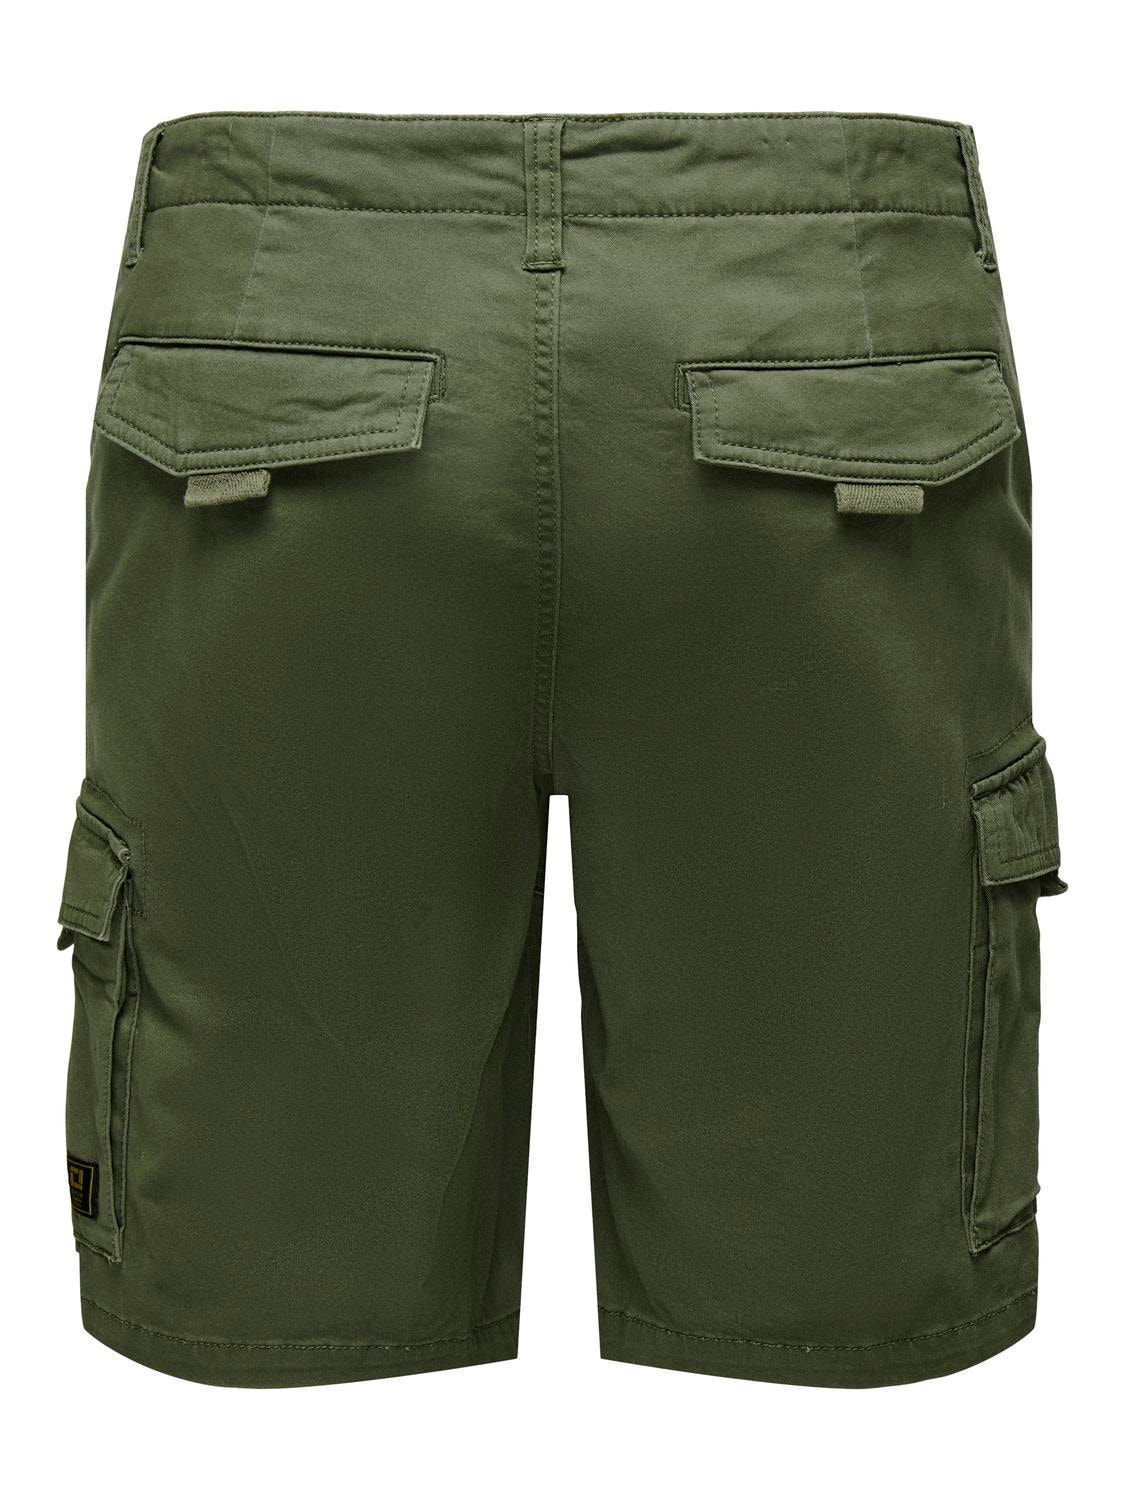 ONLY & SONS Shorts cargo Regular Fit -Olive Night - 22025602